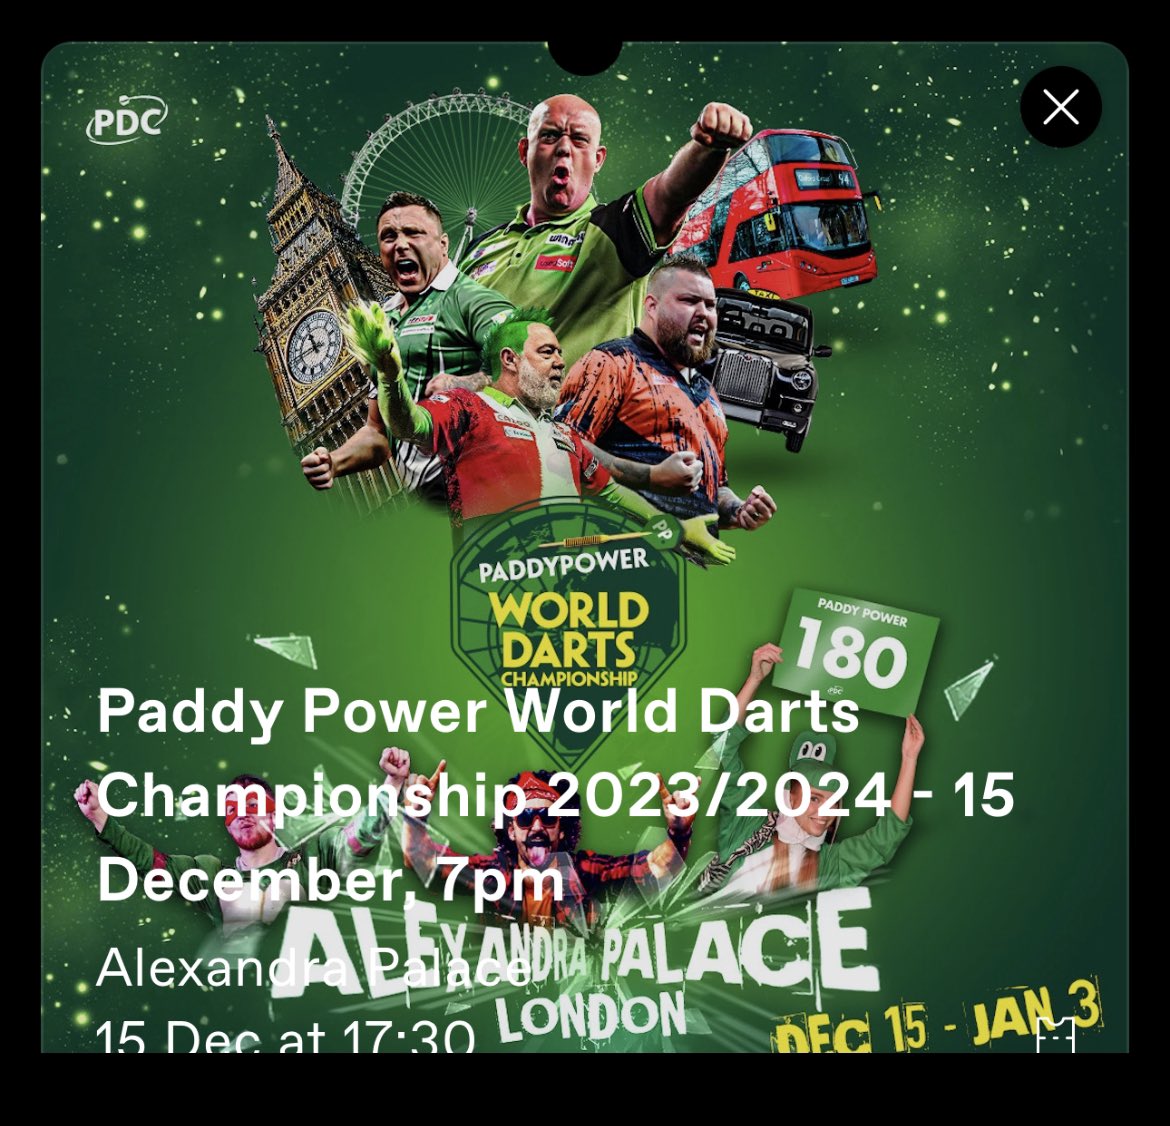 Like if you need tickets for this…

Trying to see something 👀

#Darts #WorldChampionship #DartsWorldChampionship #AlexandraPalace #Tickets